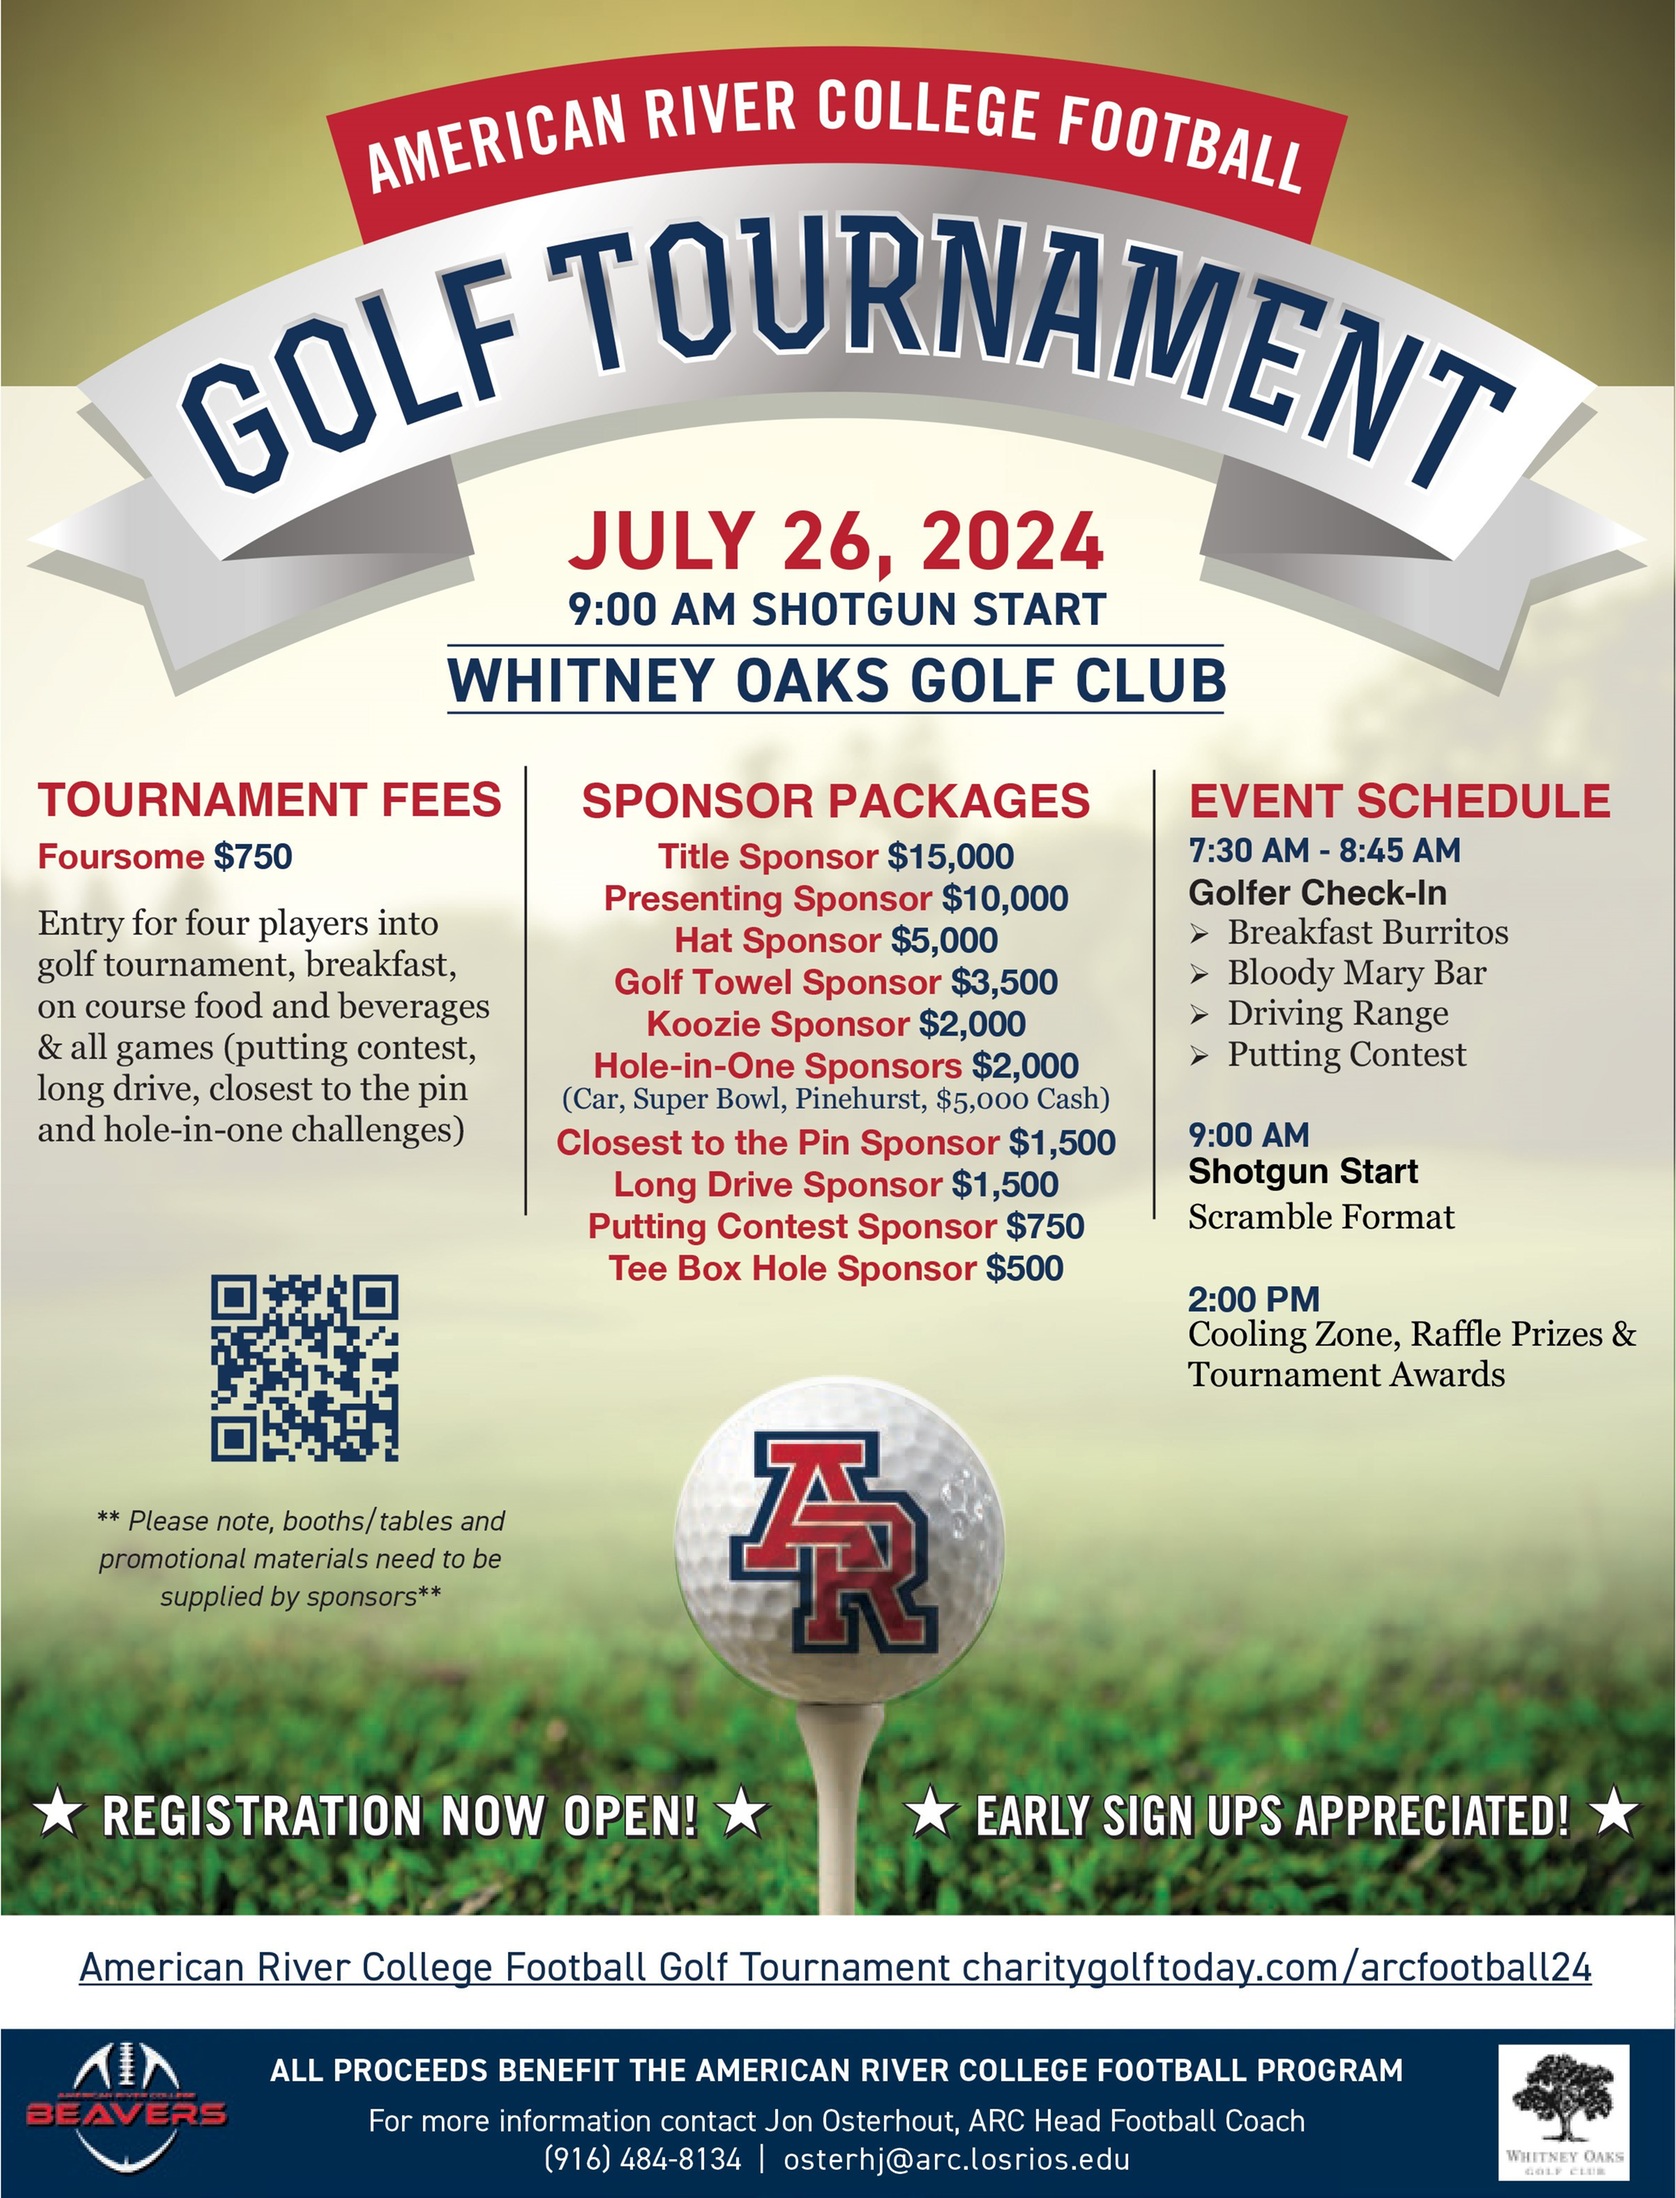 Registration is Open for the 2024 ARC Football Golf Tournament